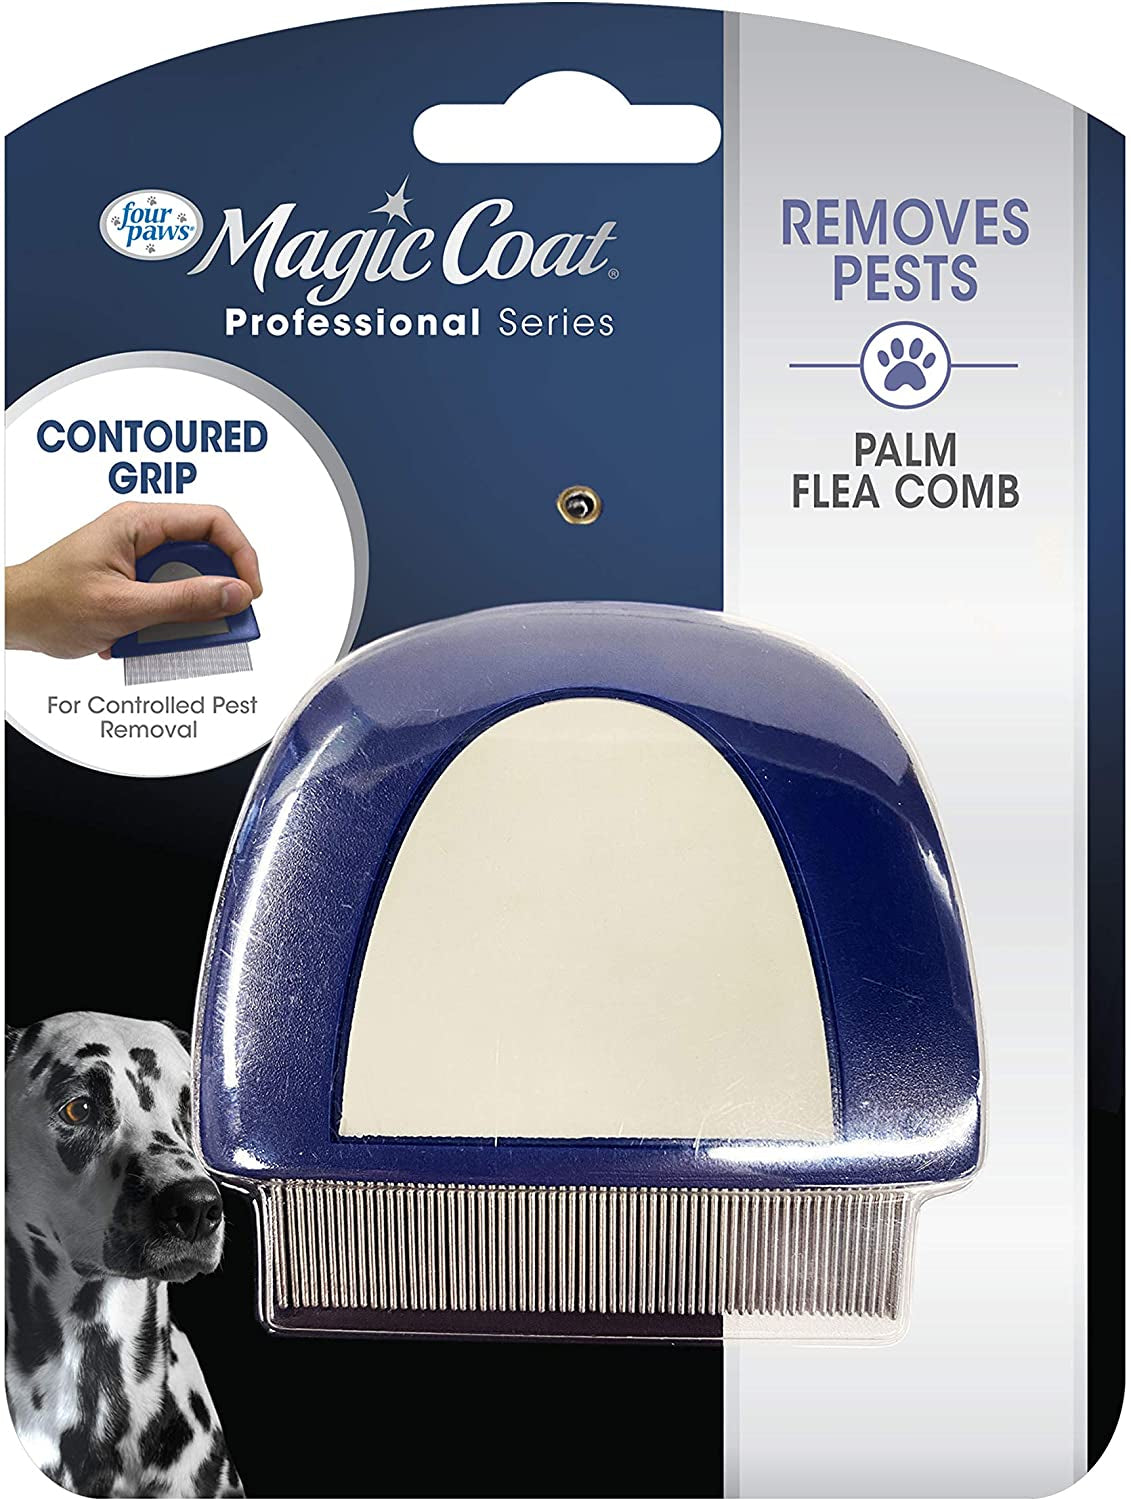 Four Paws Magic Coat Professional Series Palm Flea Comb for Dogs